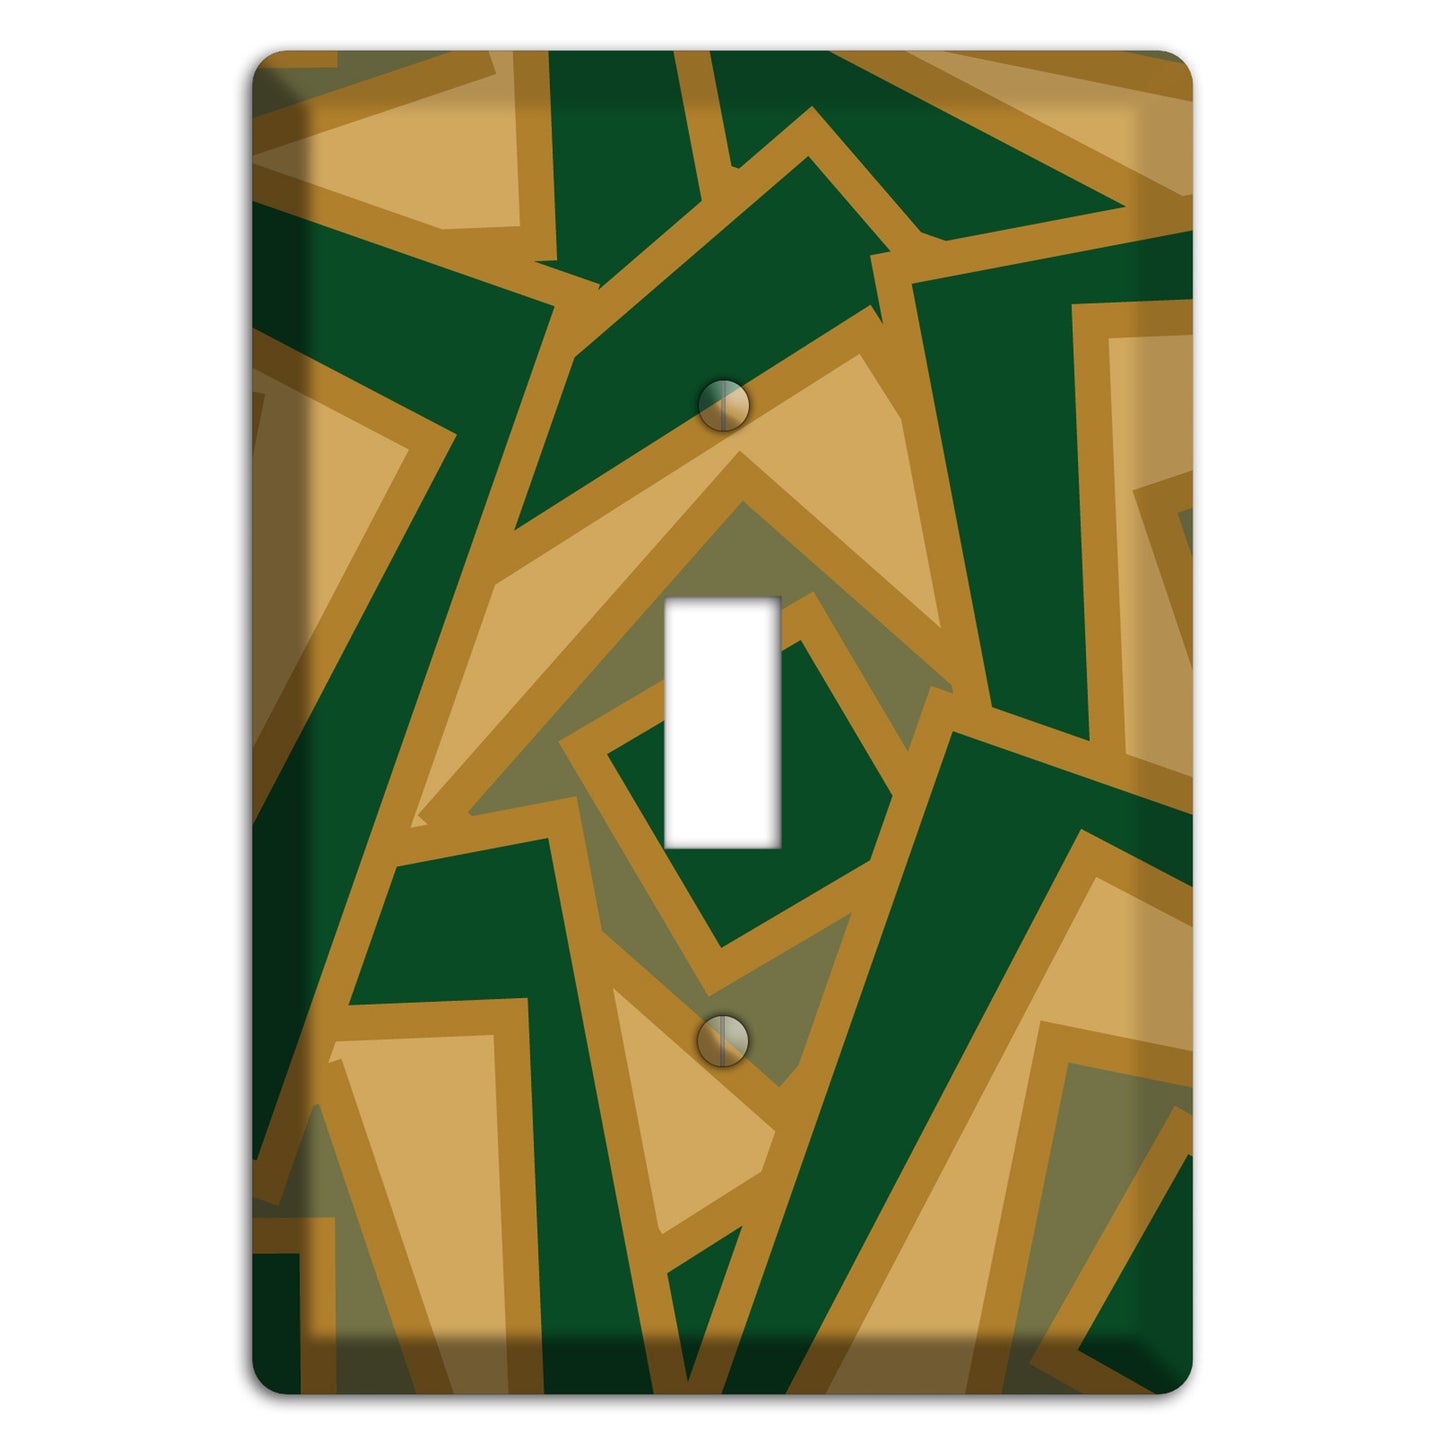 Green and Beige Retro Cubist Cover Plates